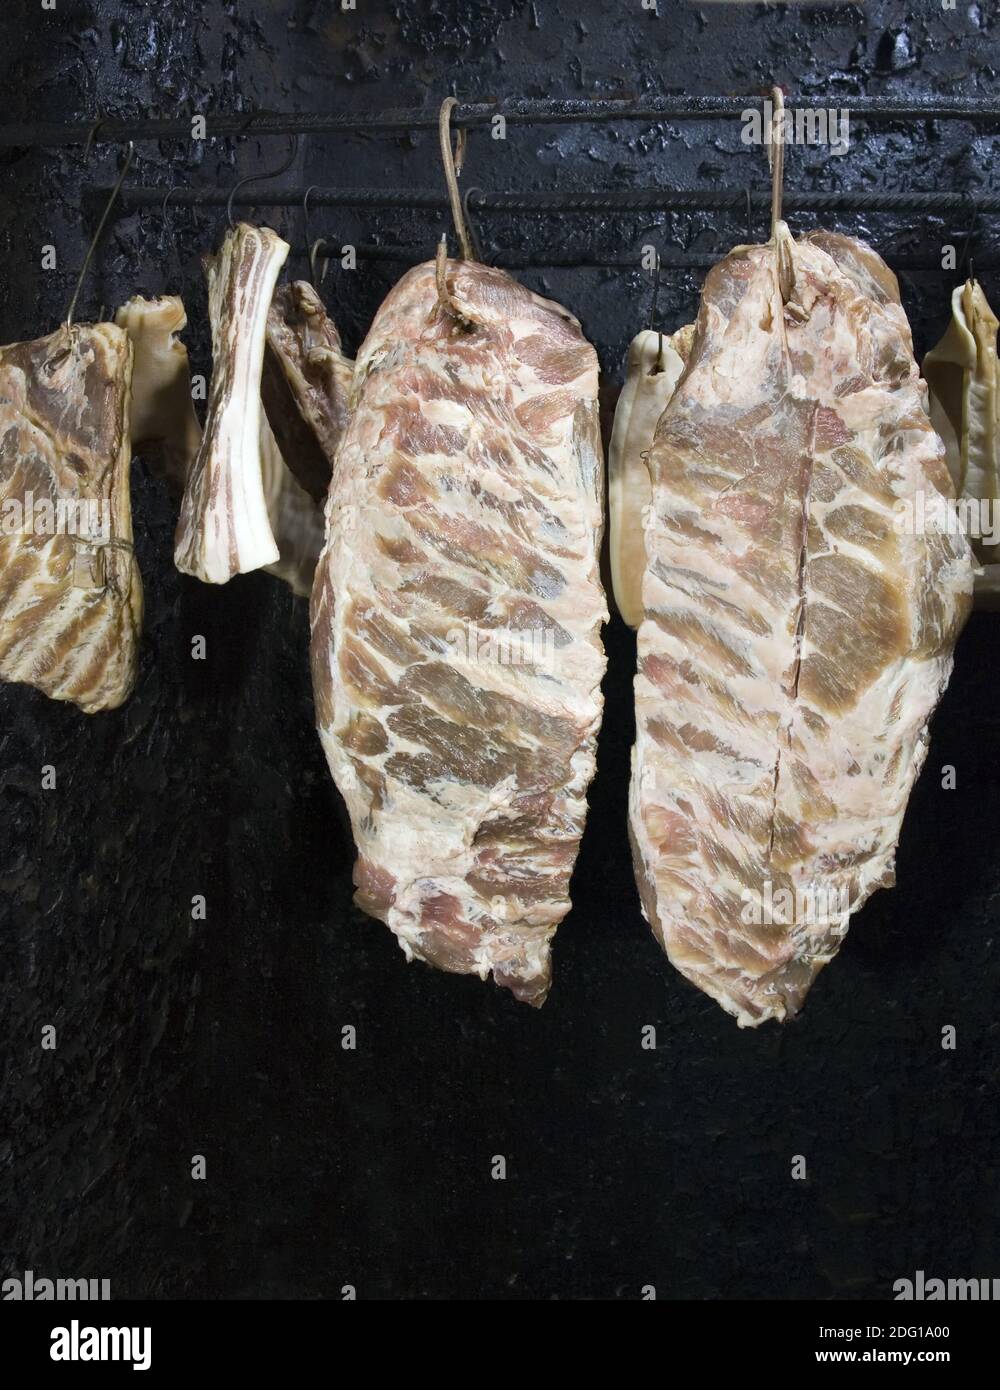 Drying meat Stock Photo